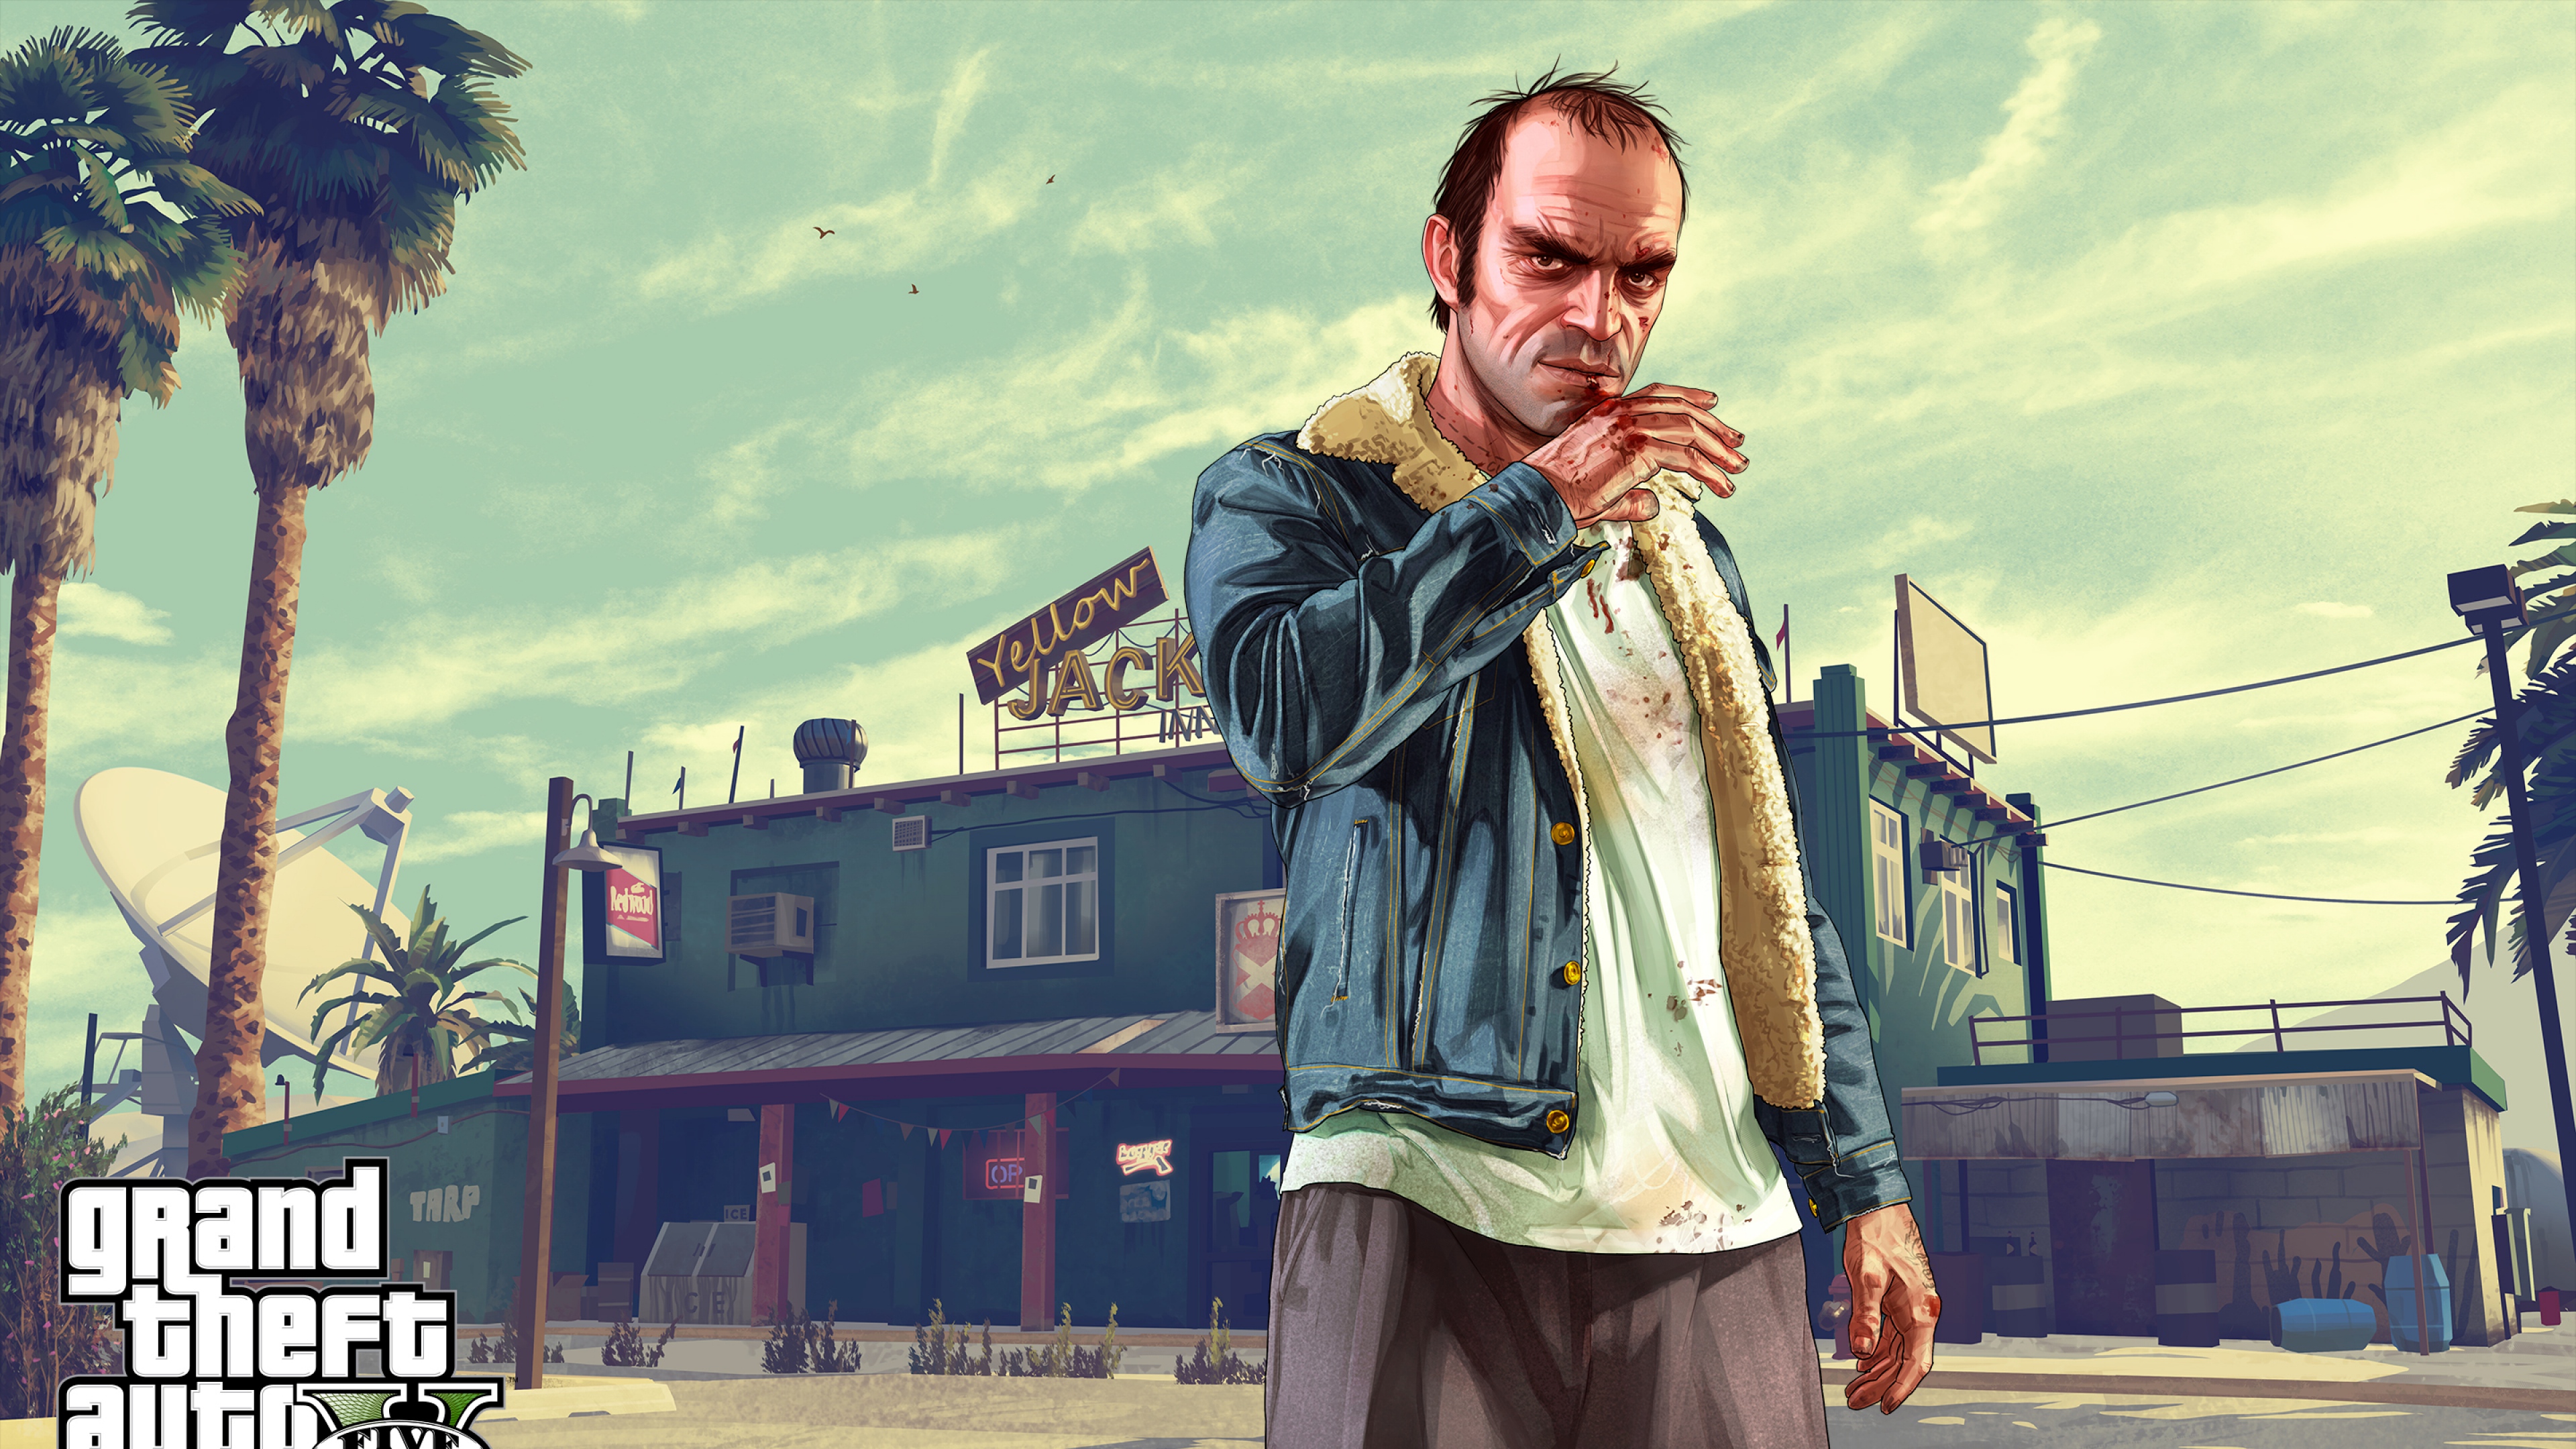 grand theft auto trevor 1535966335 - Grand Theft Auto Trevor - gta 5 wallpapers, games wallpapers, characters wallpapers